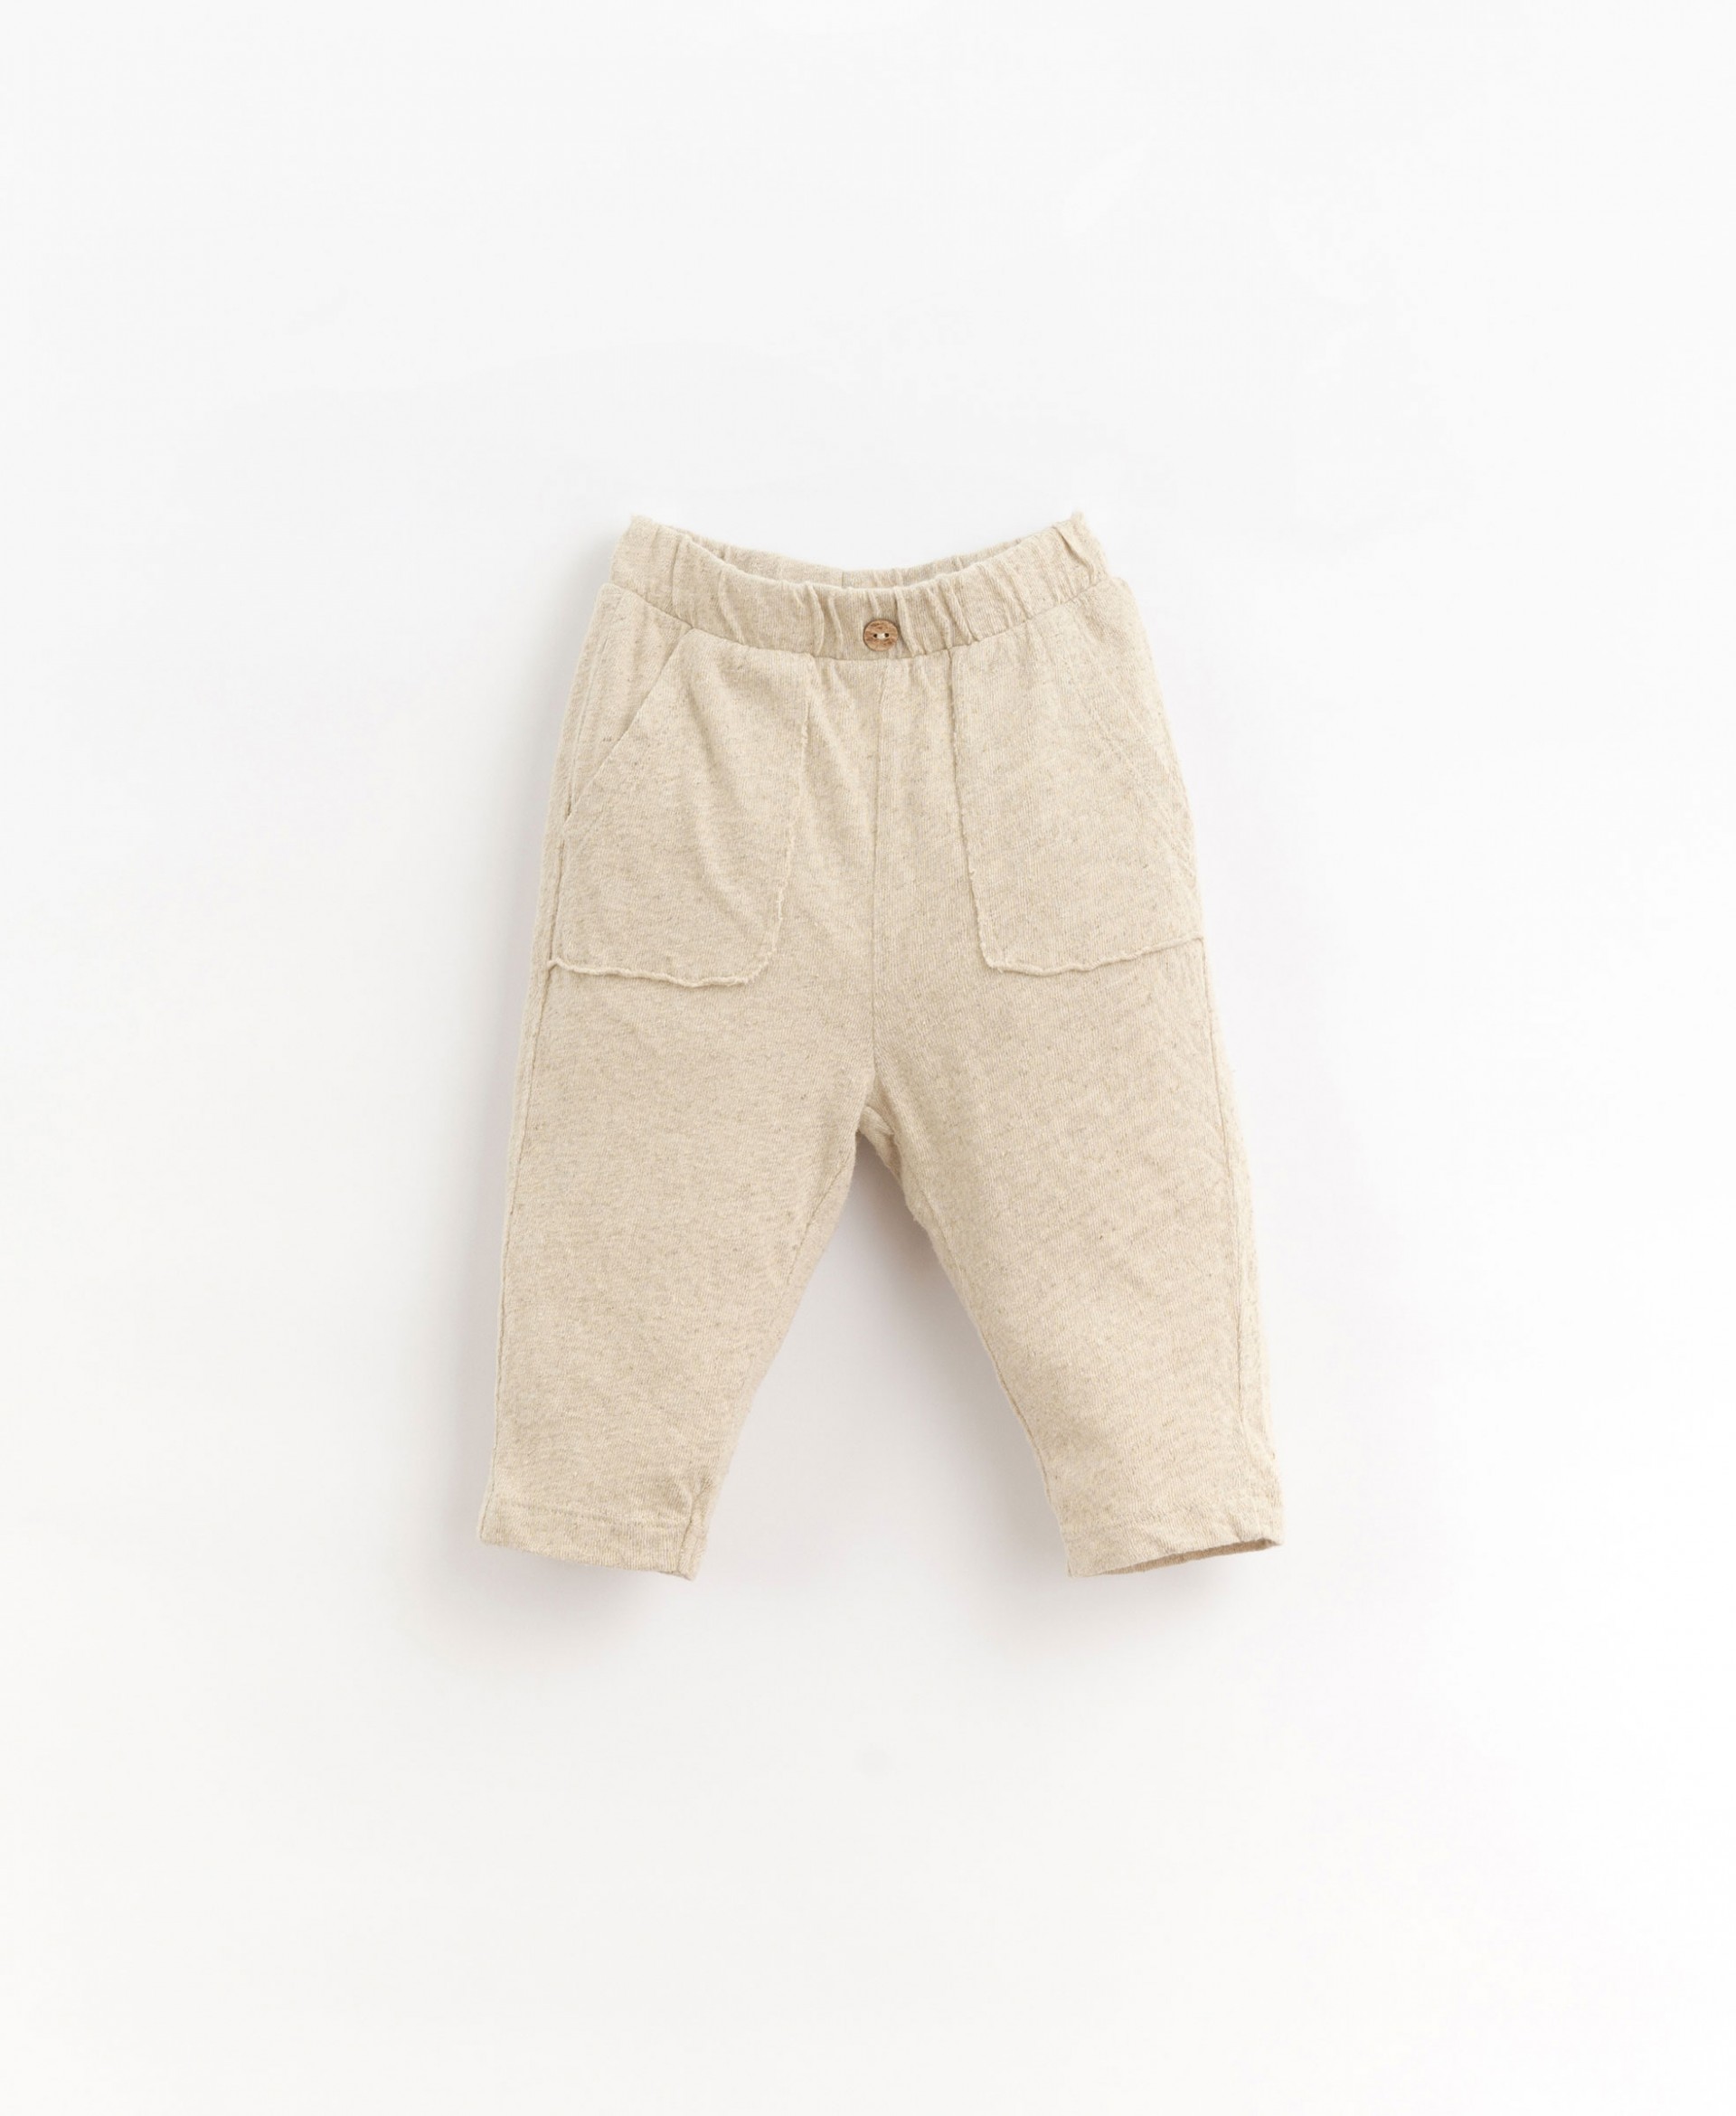 Jersey stitch trousers with front pockets | Organic Care